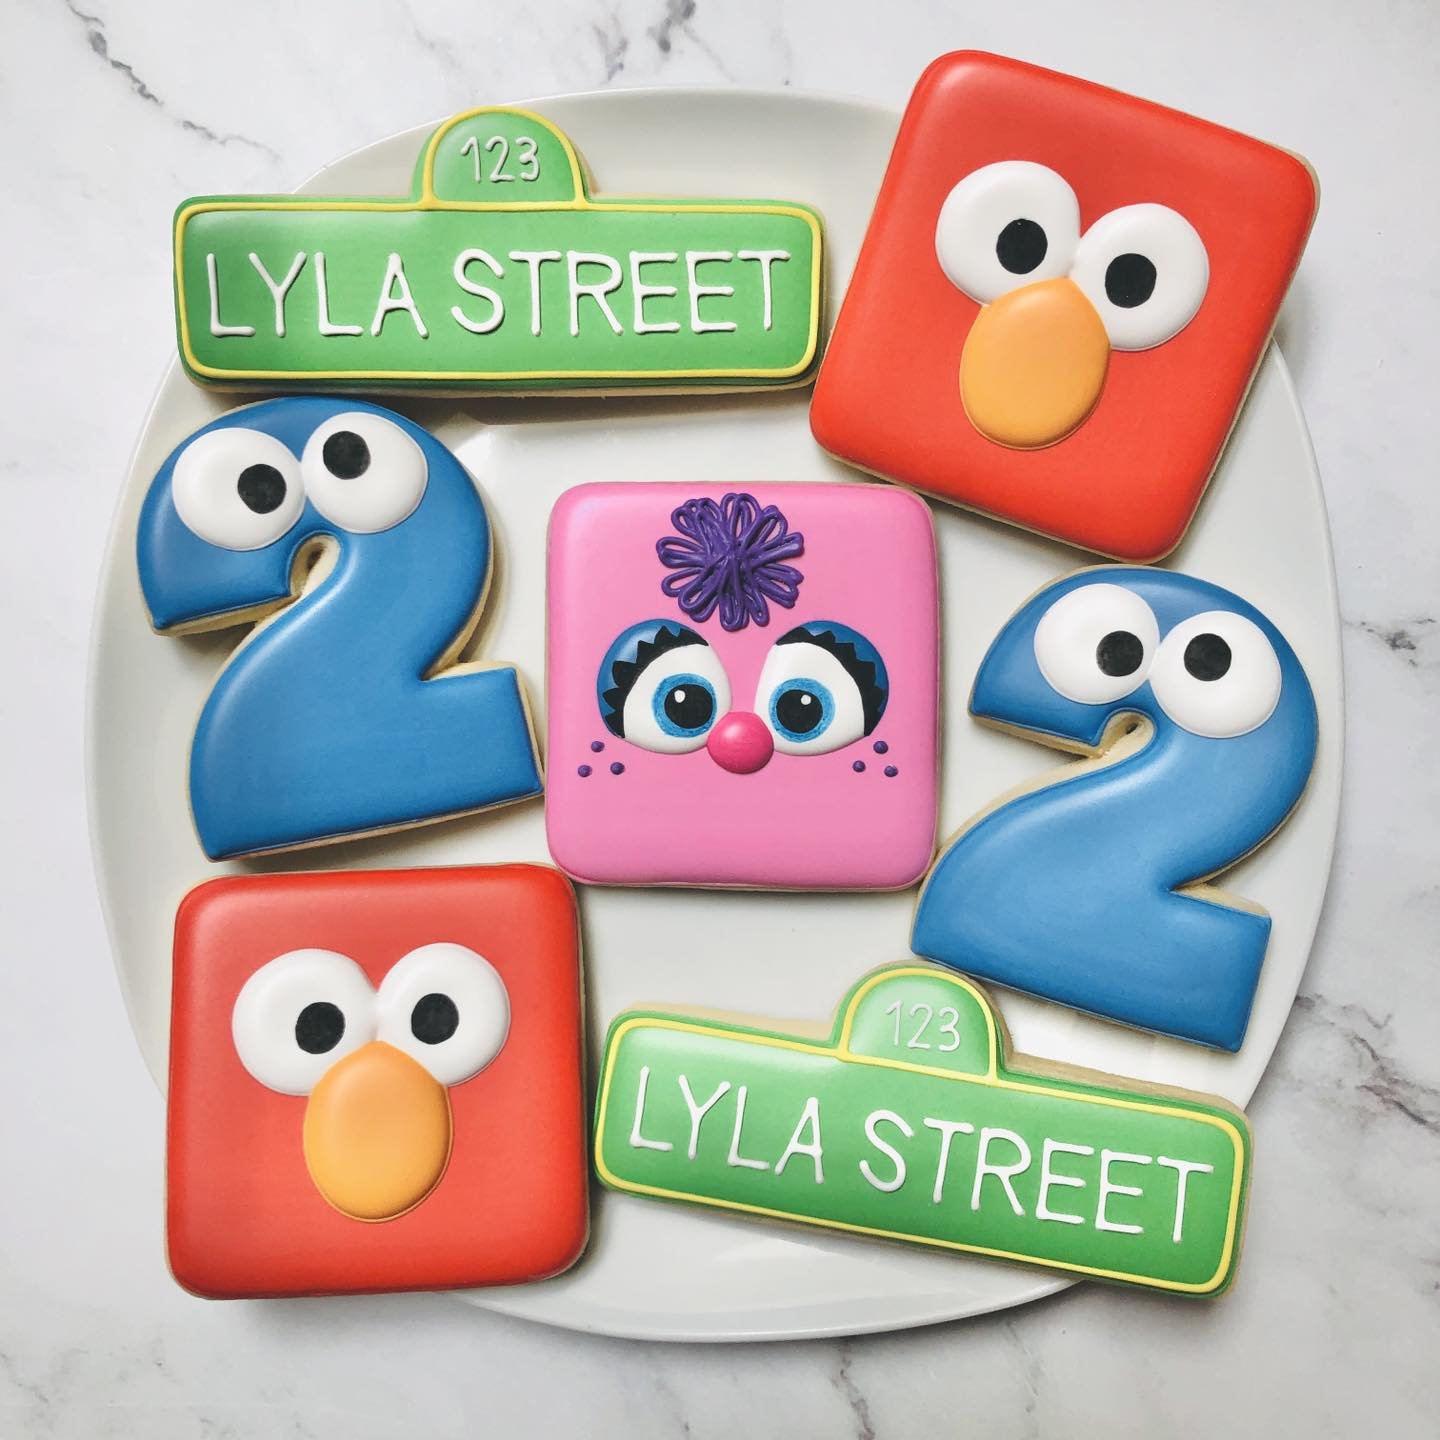 Sesame Street cookies for a birthday celebration! 🎉❤️💙💚🩷
.
.
.
.
. 
#sesamestreetcookies #sesamestreet #elmo #cookiemonster #abbycadabby #thisistwo  #happybirthday #happybirthdaycookies #birthdaycookies #birthdaytreats #birthdaypartyfavors #party